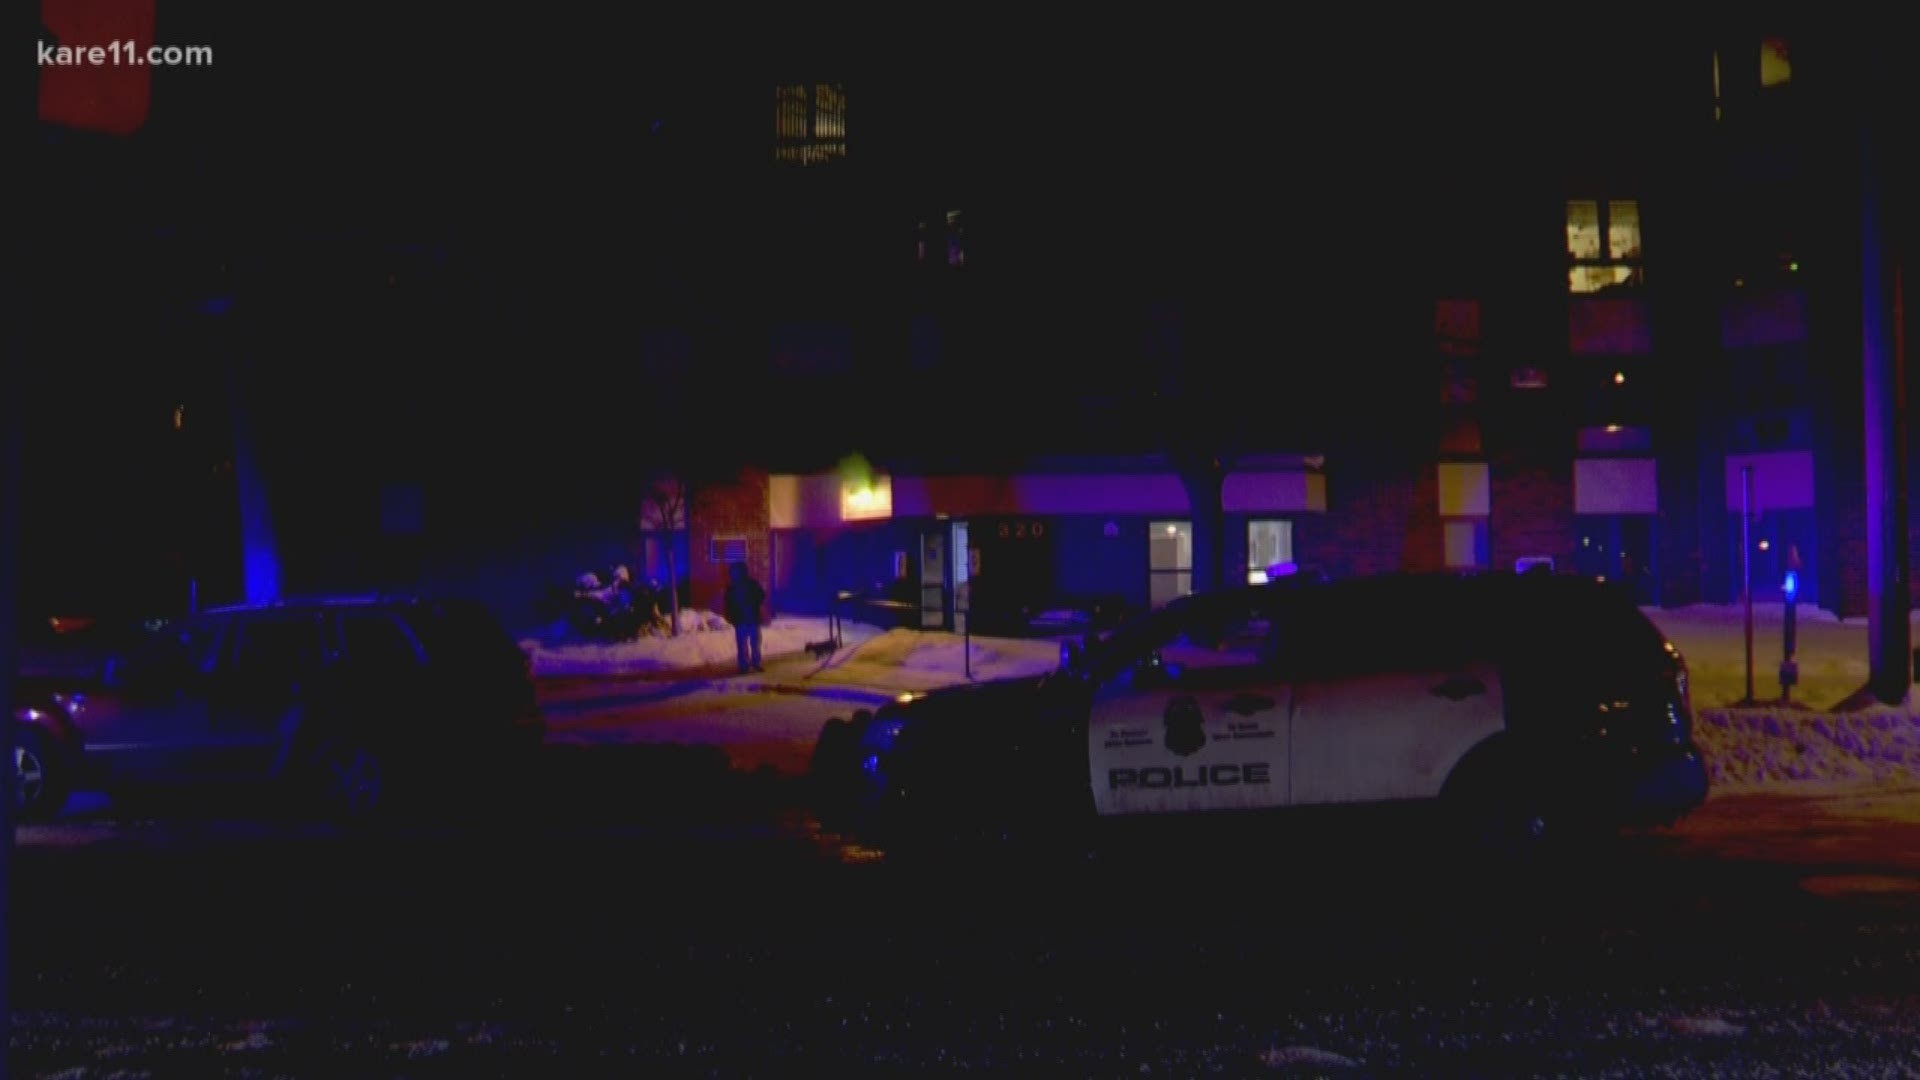 Minneapolis police are investigating after two women were found shot and killed at an apartment complex Saturday night near St. Anthony Main